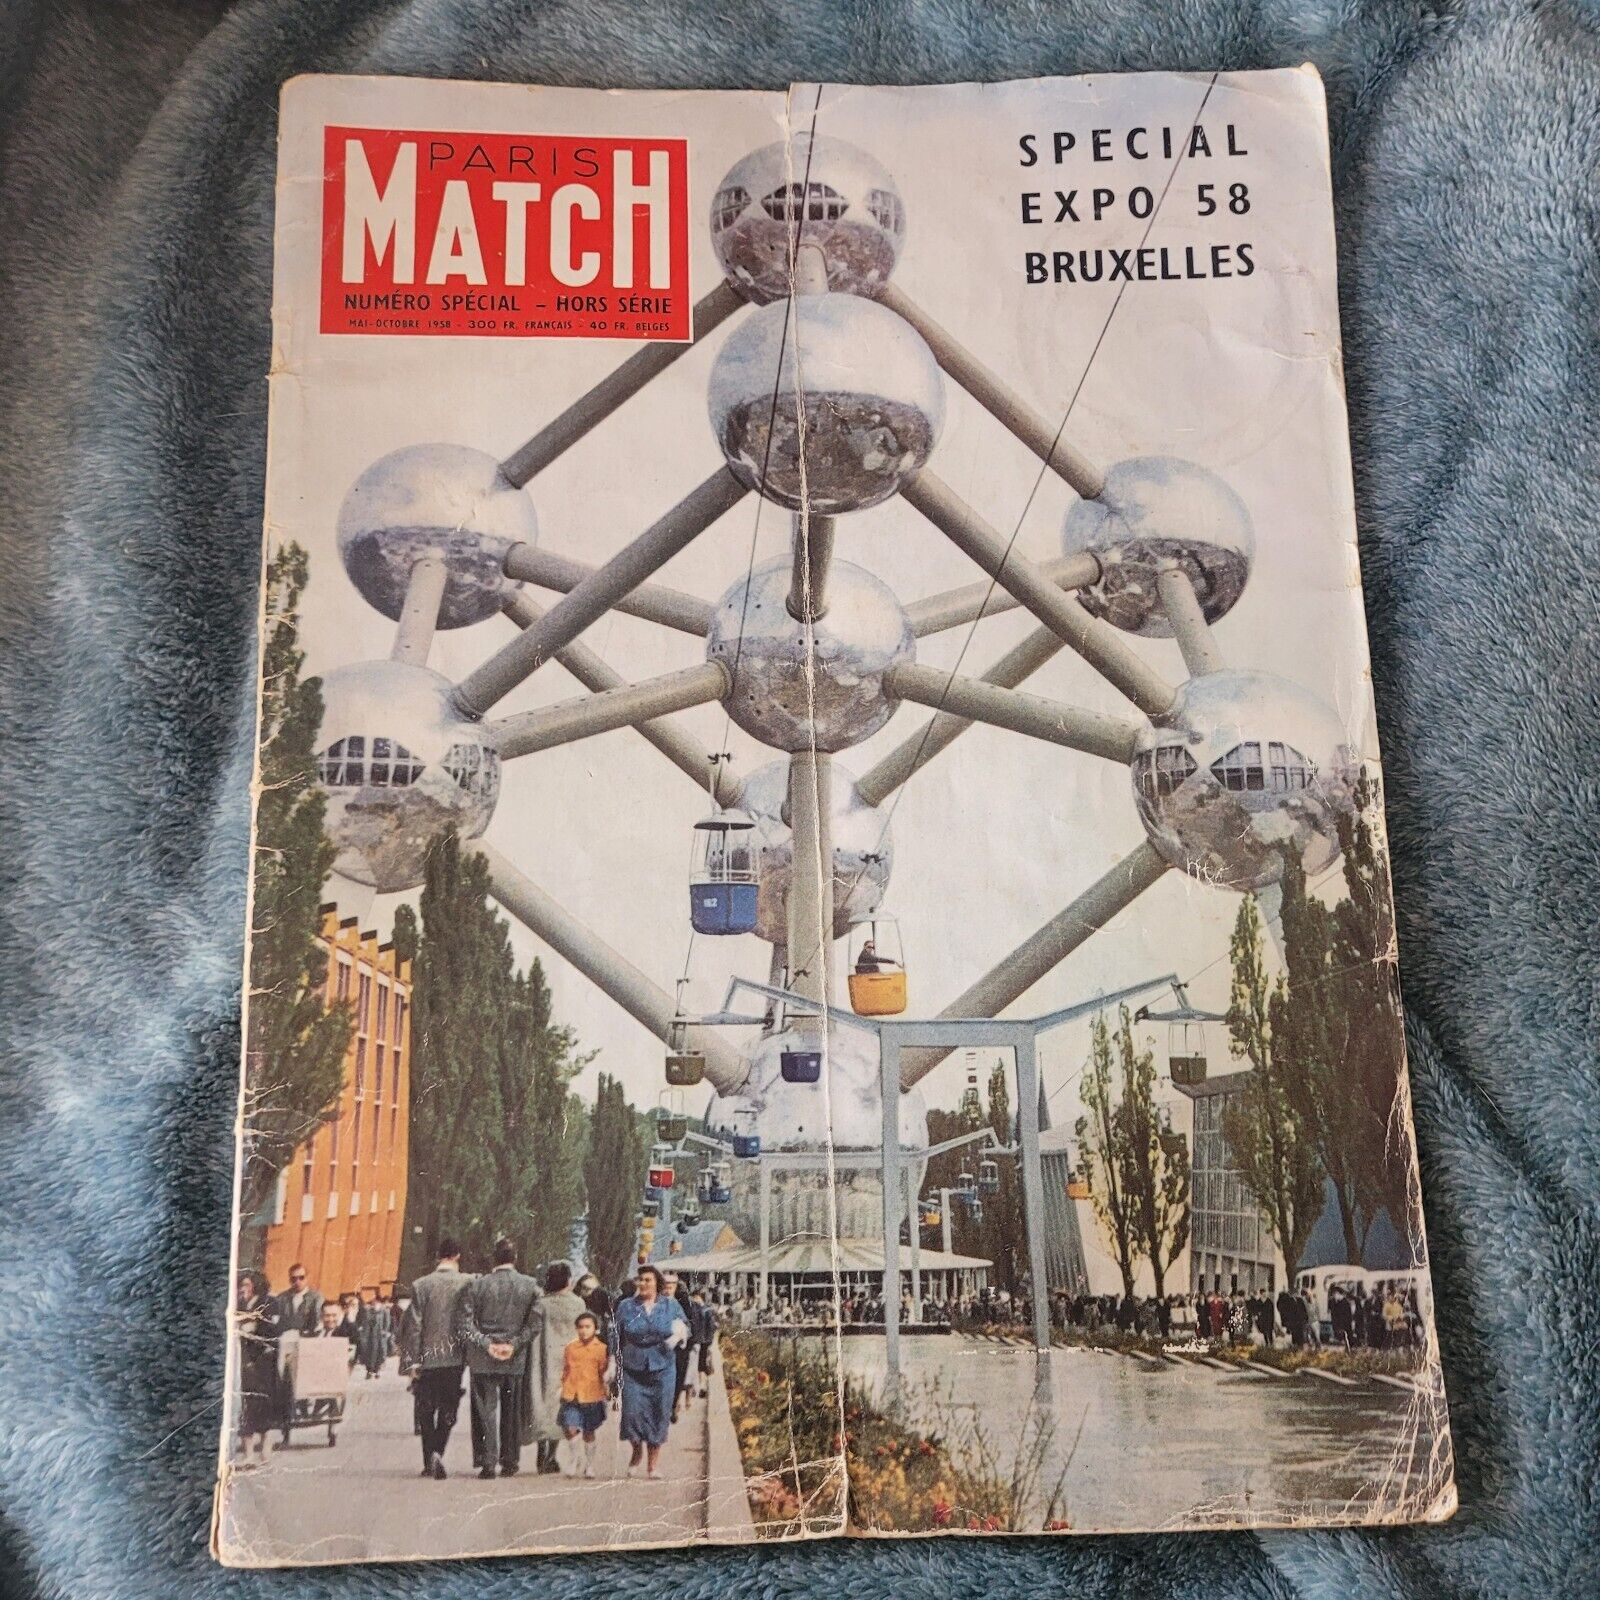 Paris Match EXPO-58 Bruxelles World Exhibition Special Edition May To Oct 1958